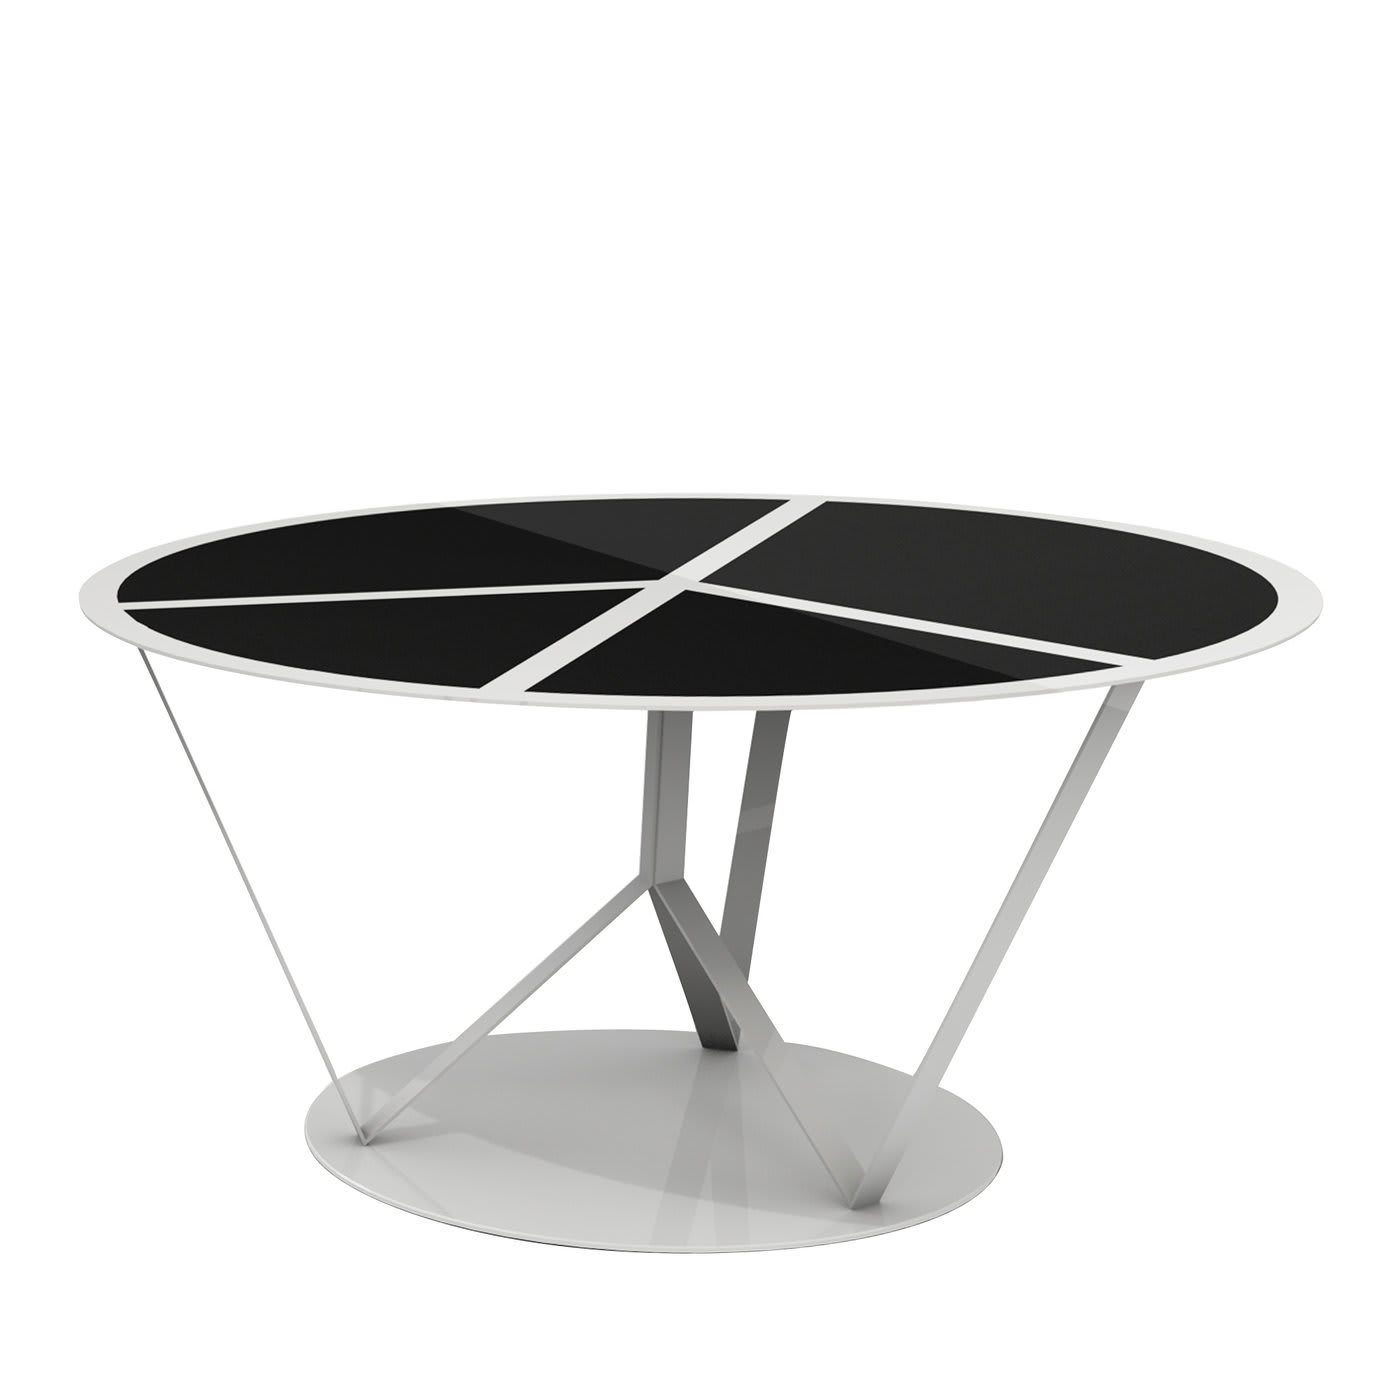 Pace White Table with Black by Garilab by Piter Perbellini - Altreforme